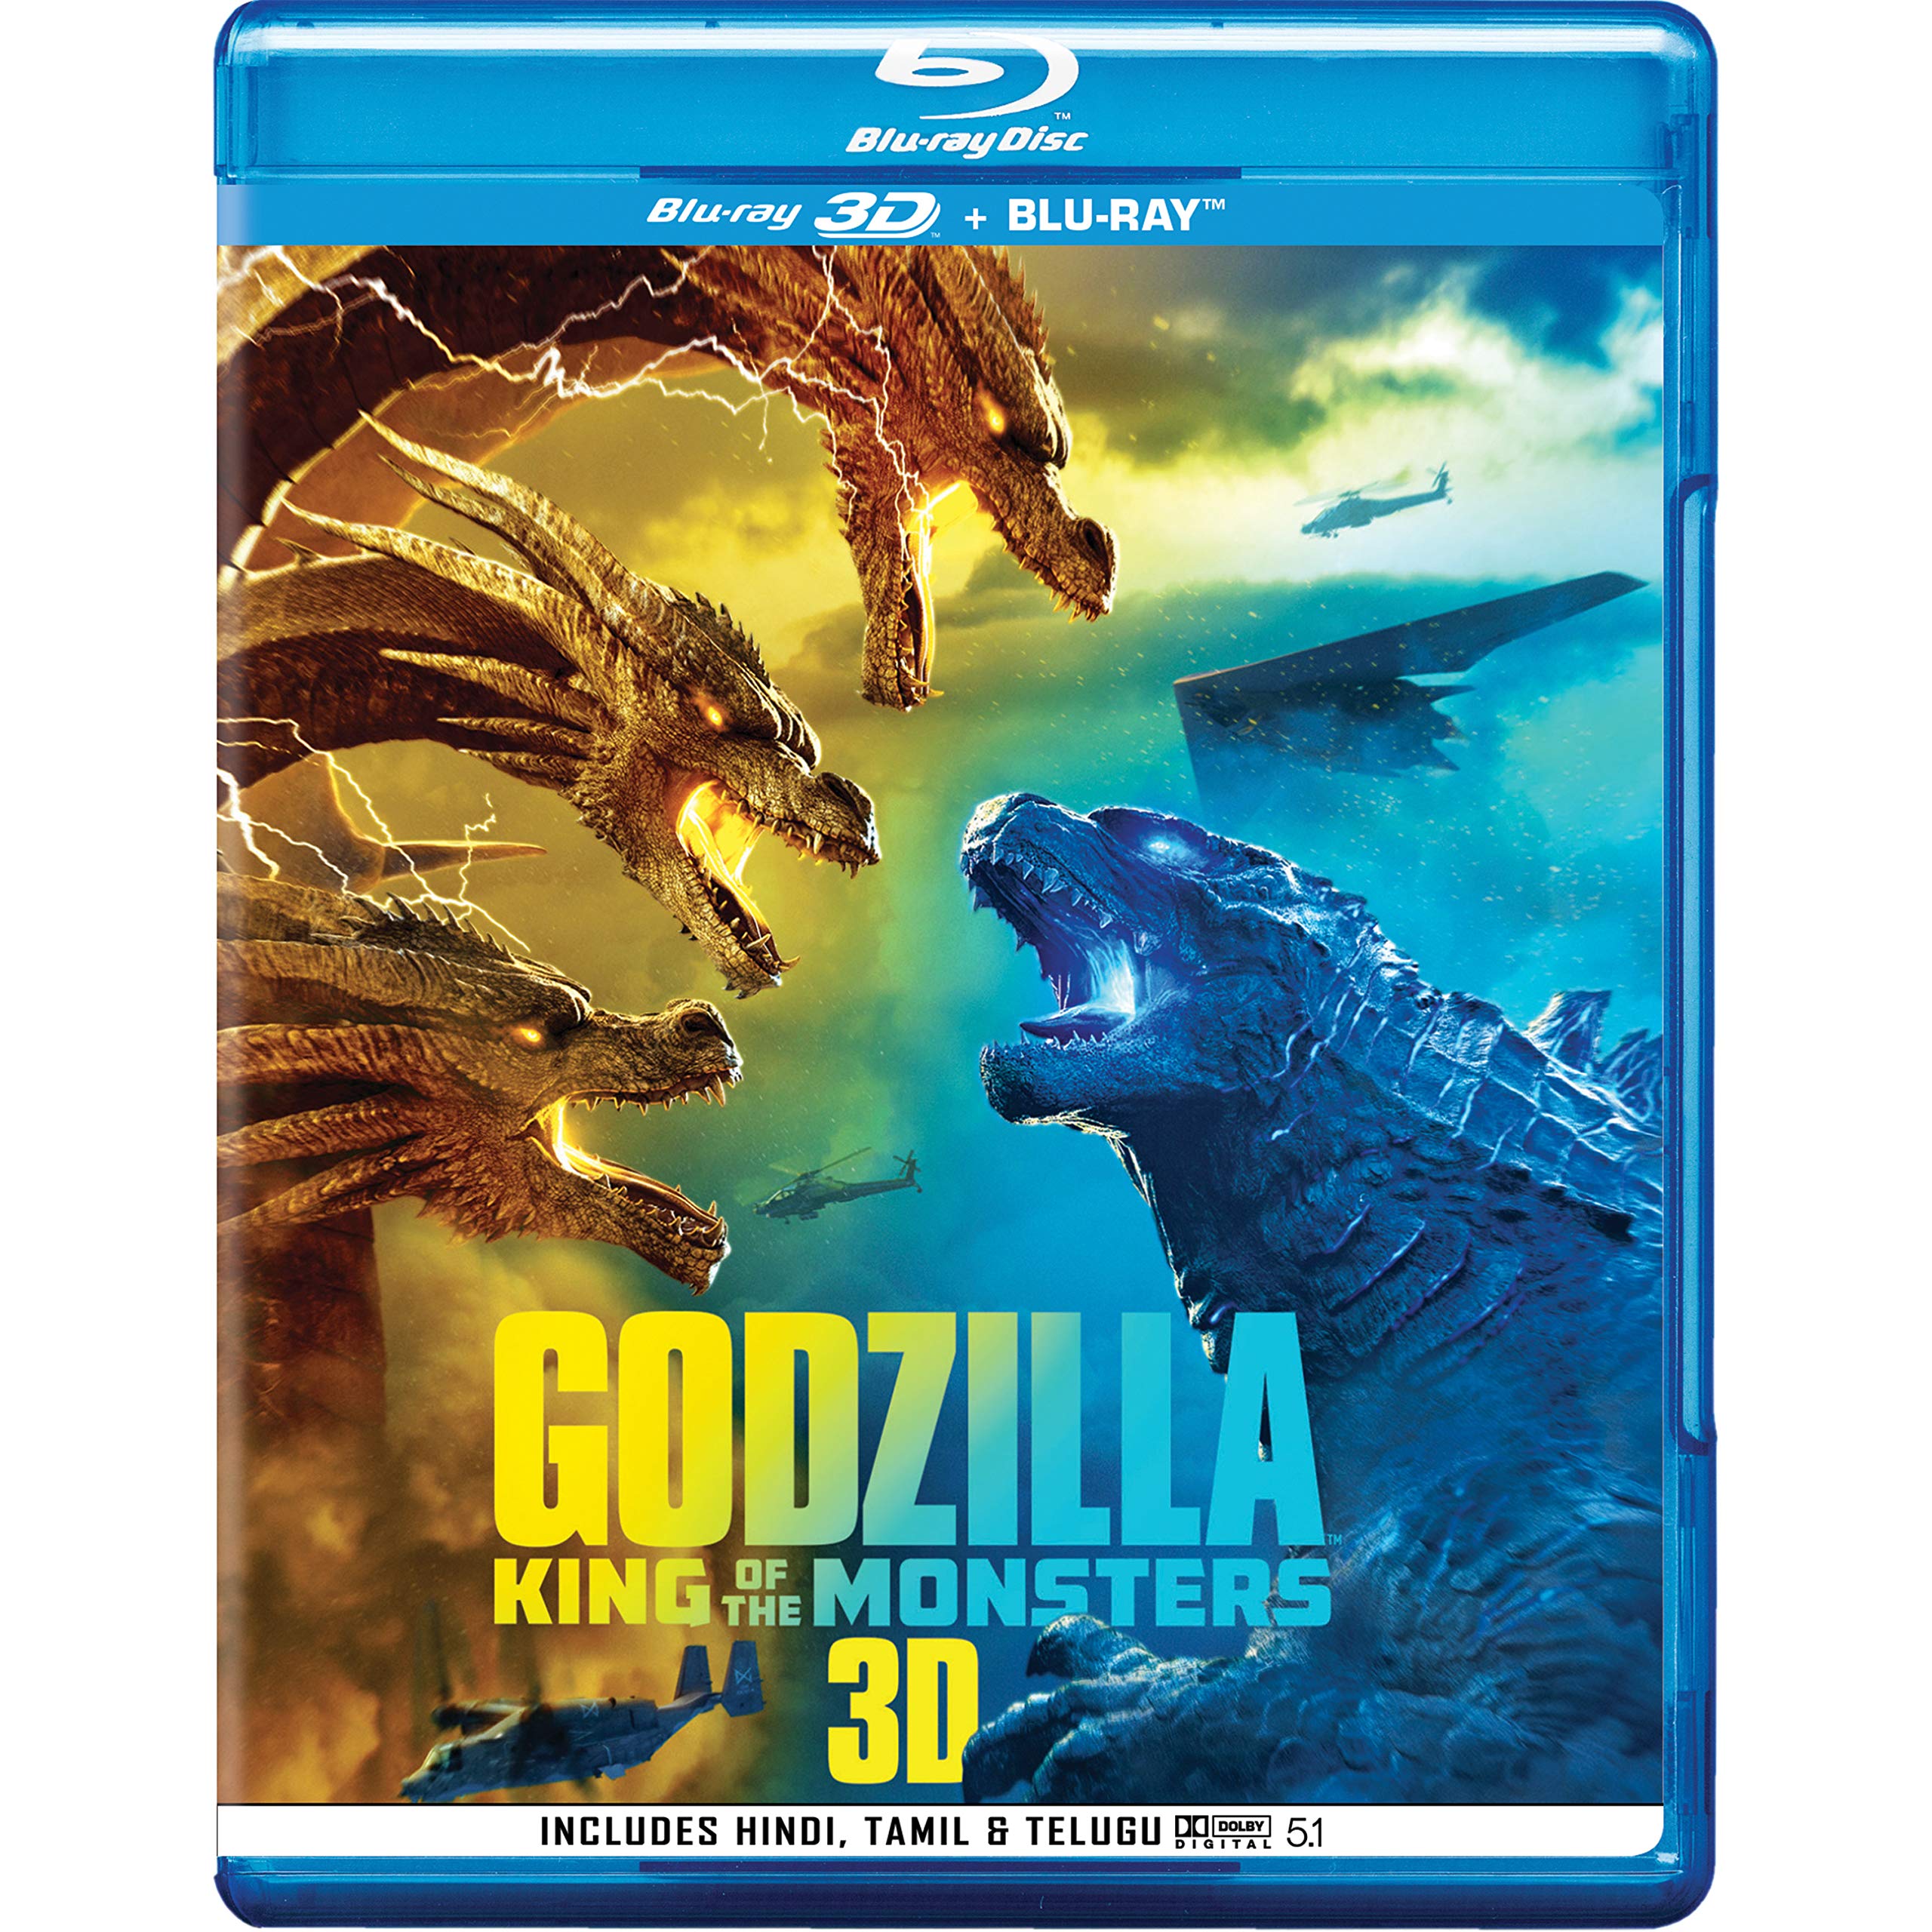 godzilla-king-of-the-monsters-blu-ray-3d-blu-ray-2-disc-movie-p